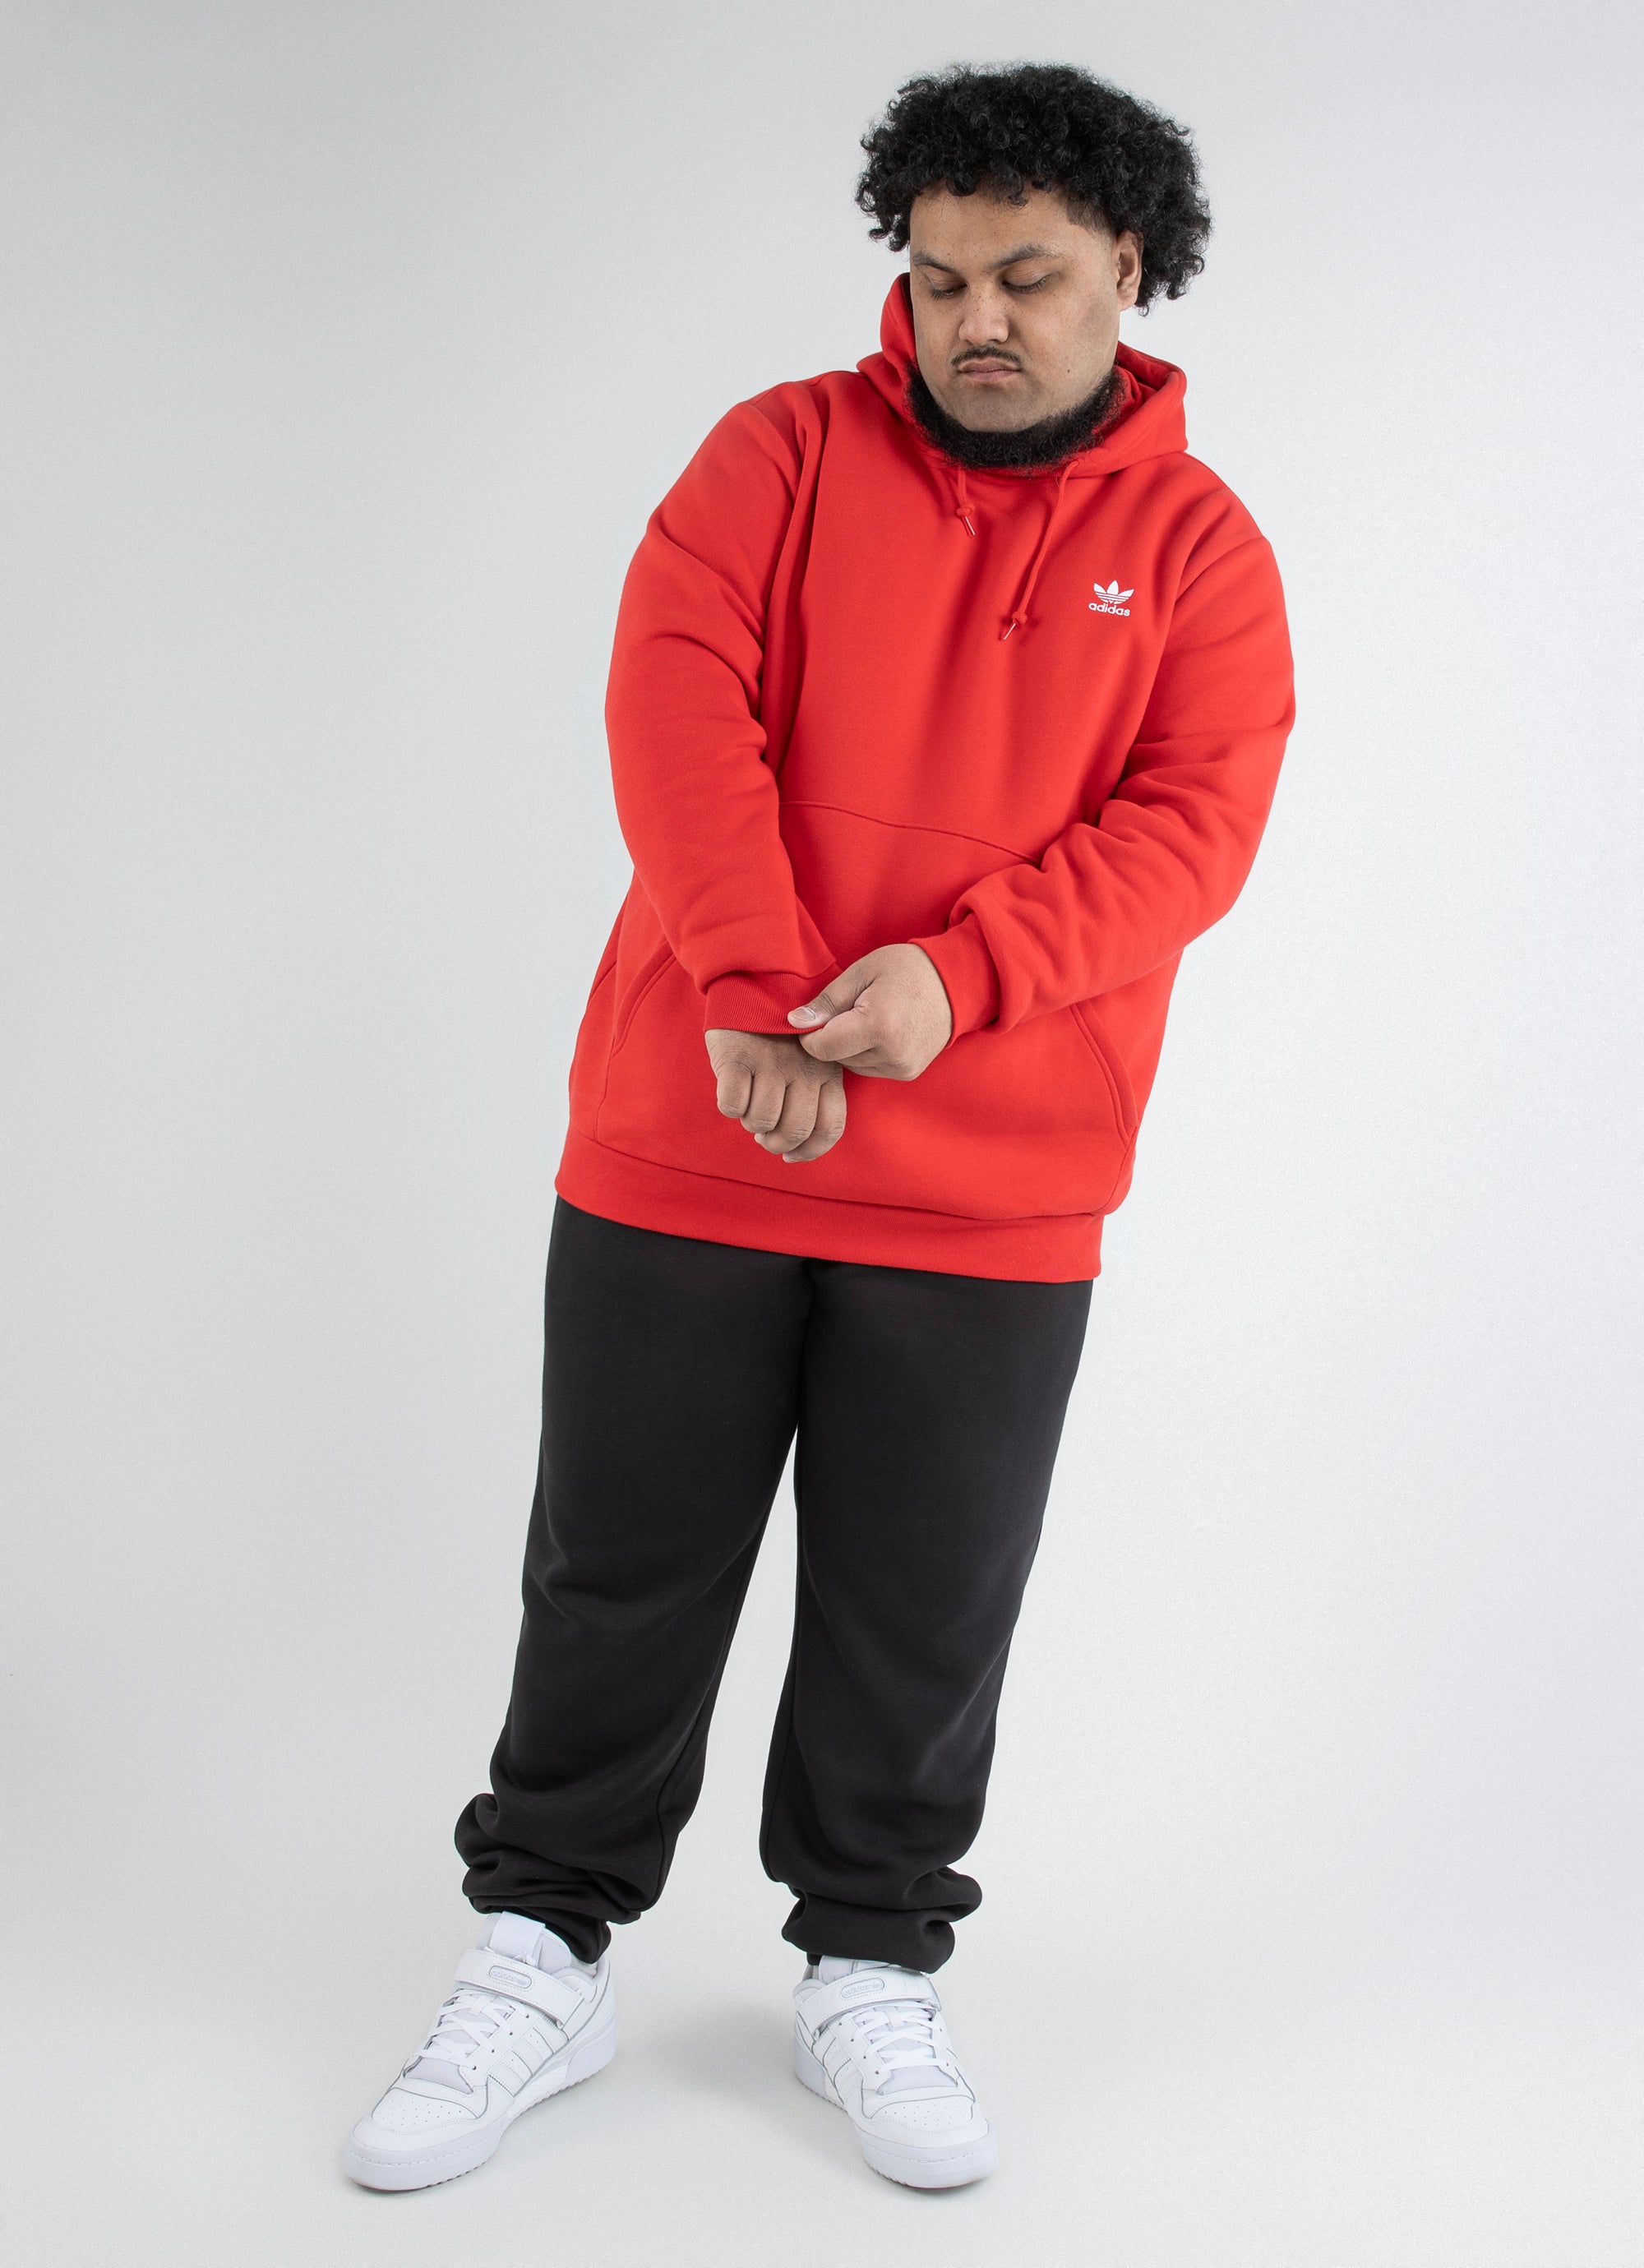 adidas Originals sweatpants in red with oversized trefoil logo